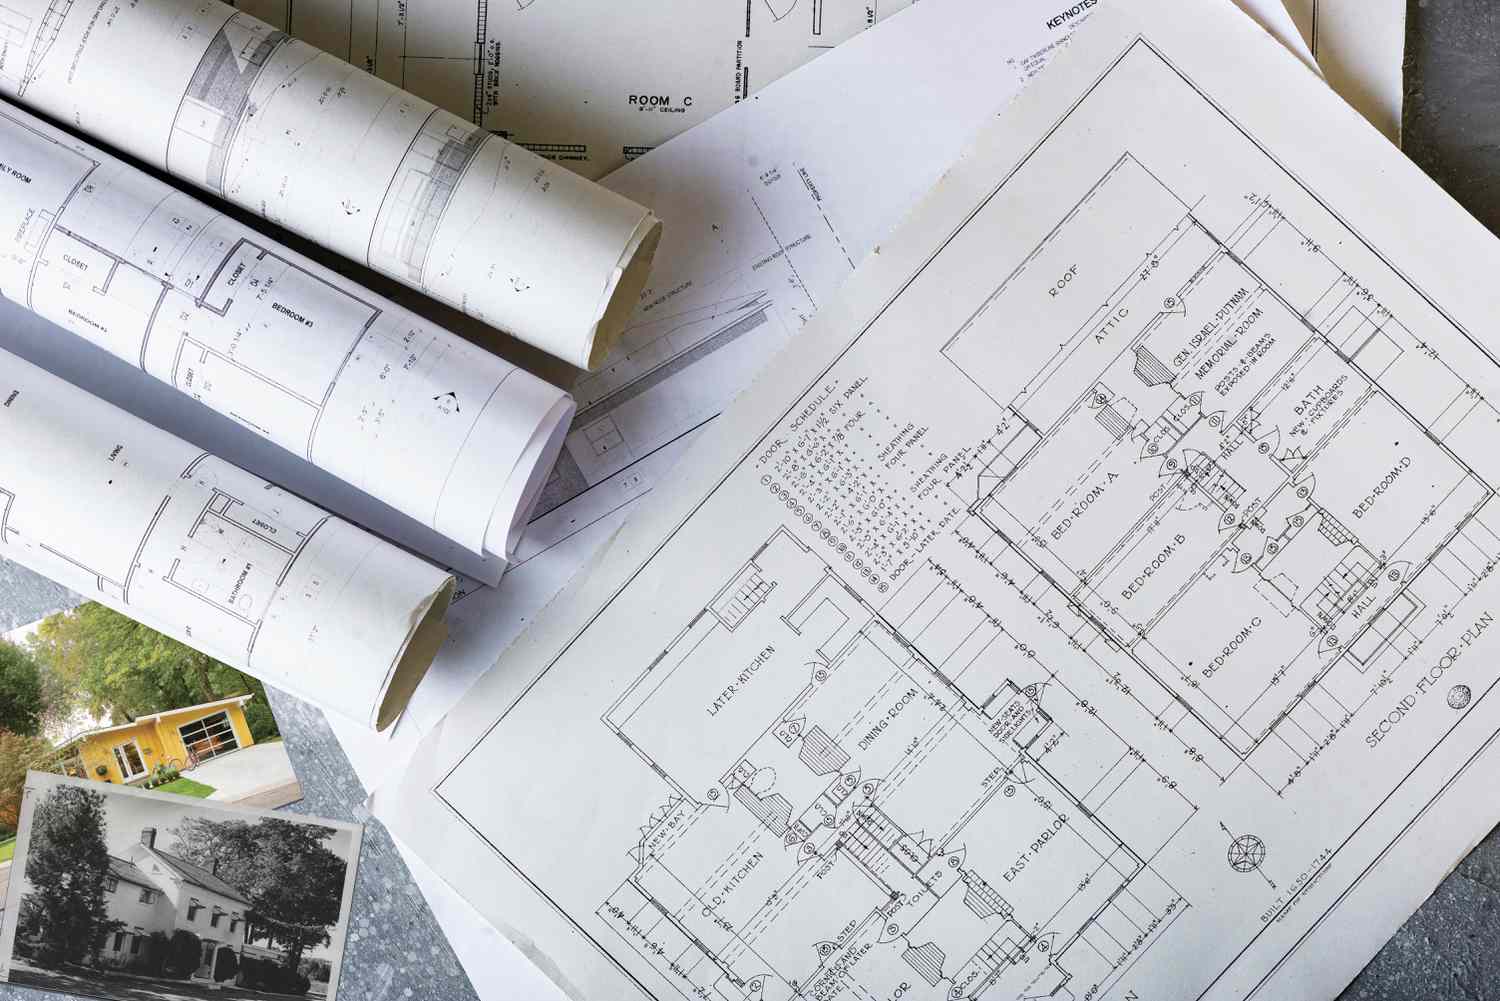 Every real estate project needs a plan. When selling consider the seven step blueprint below